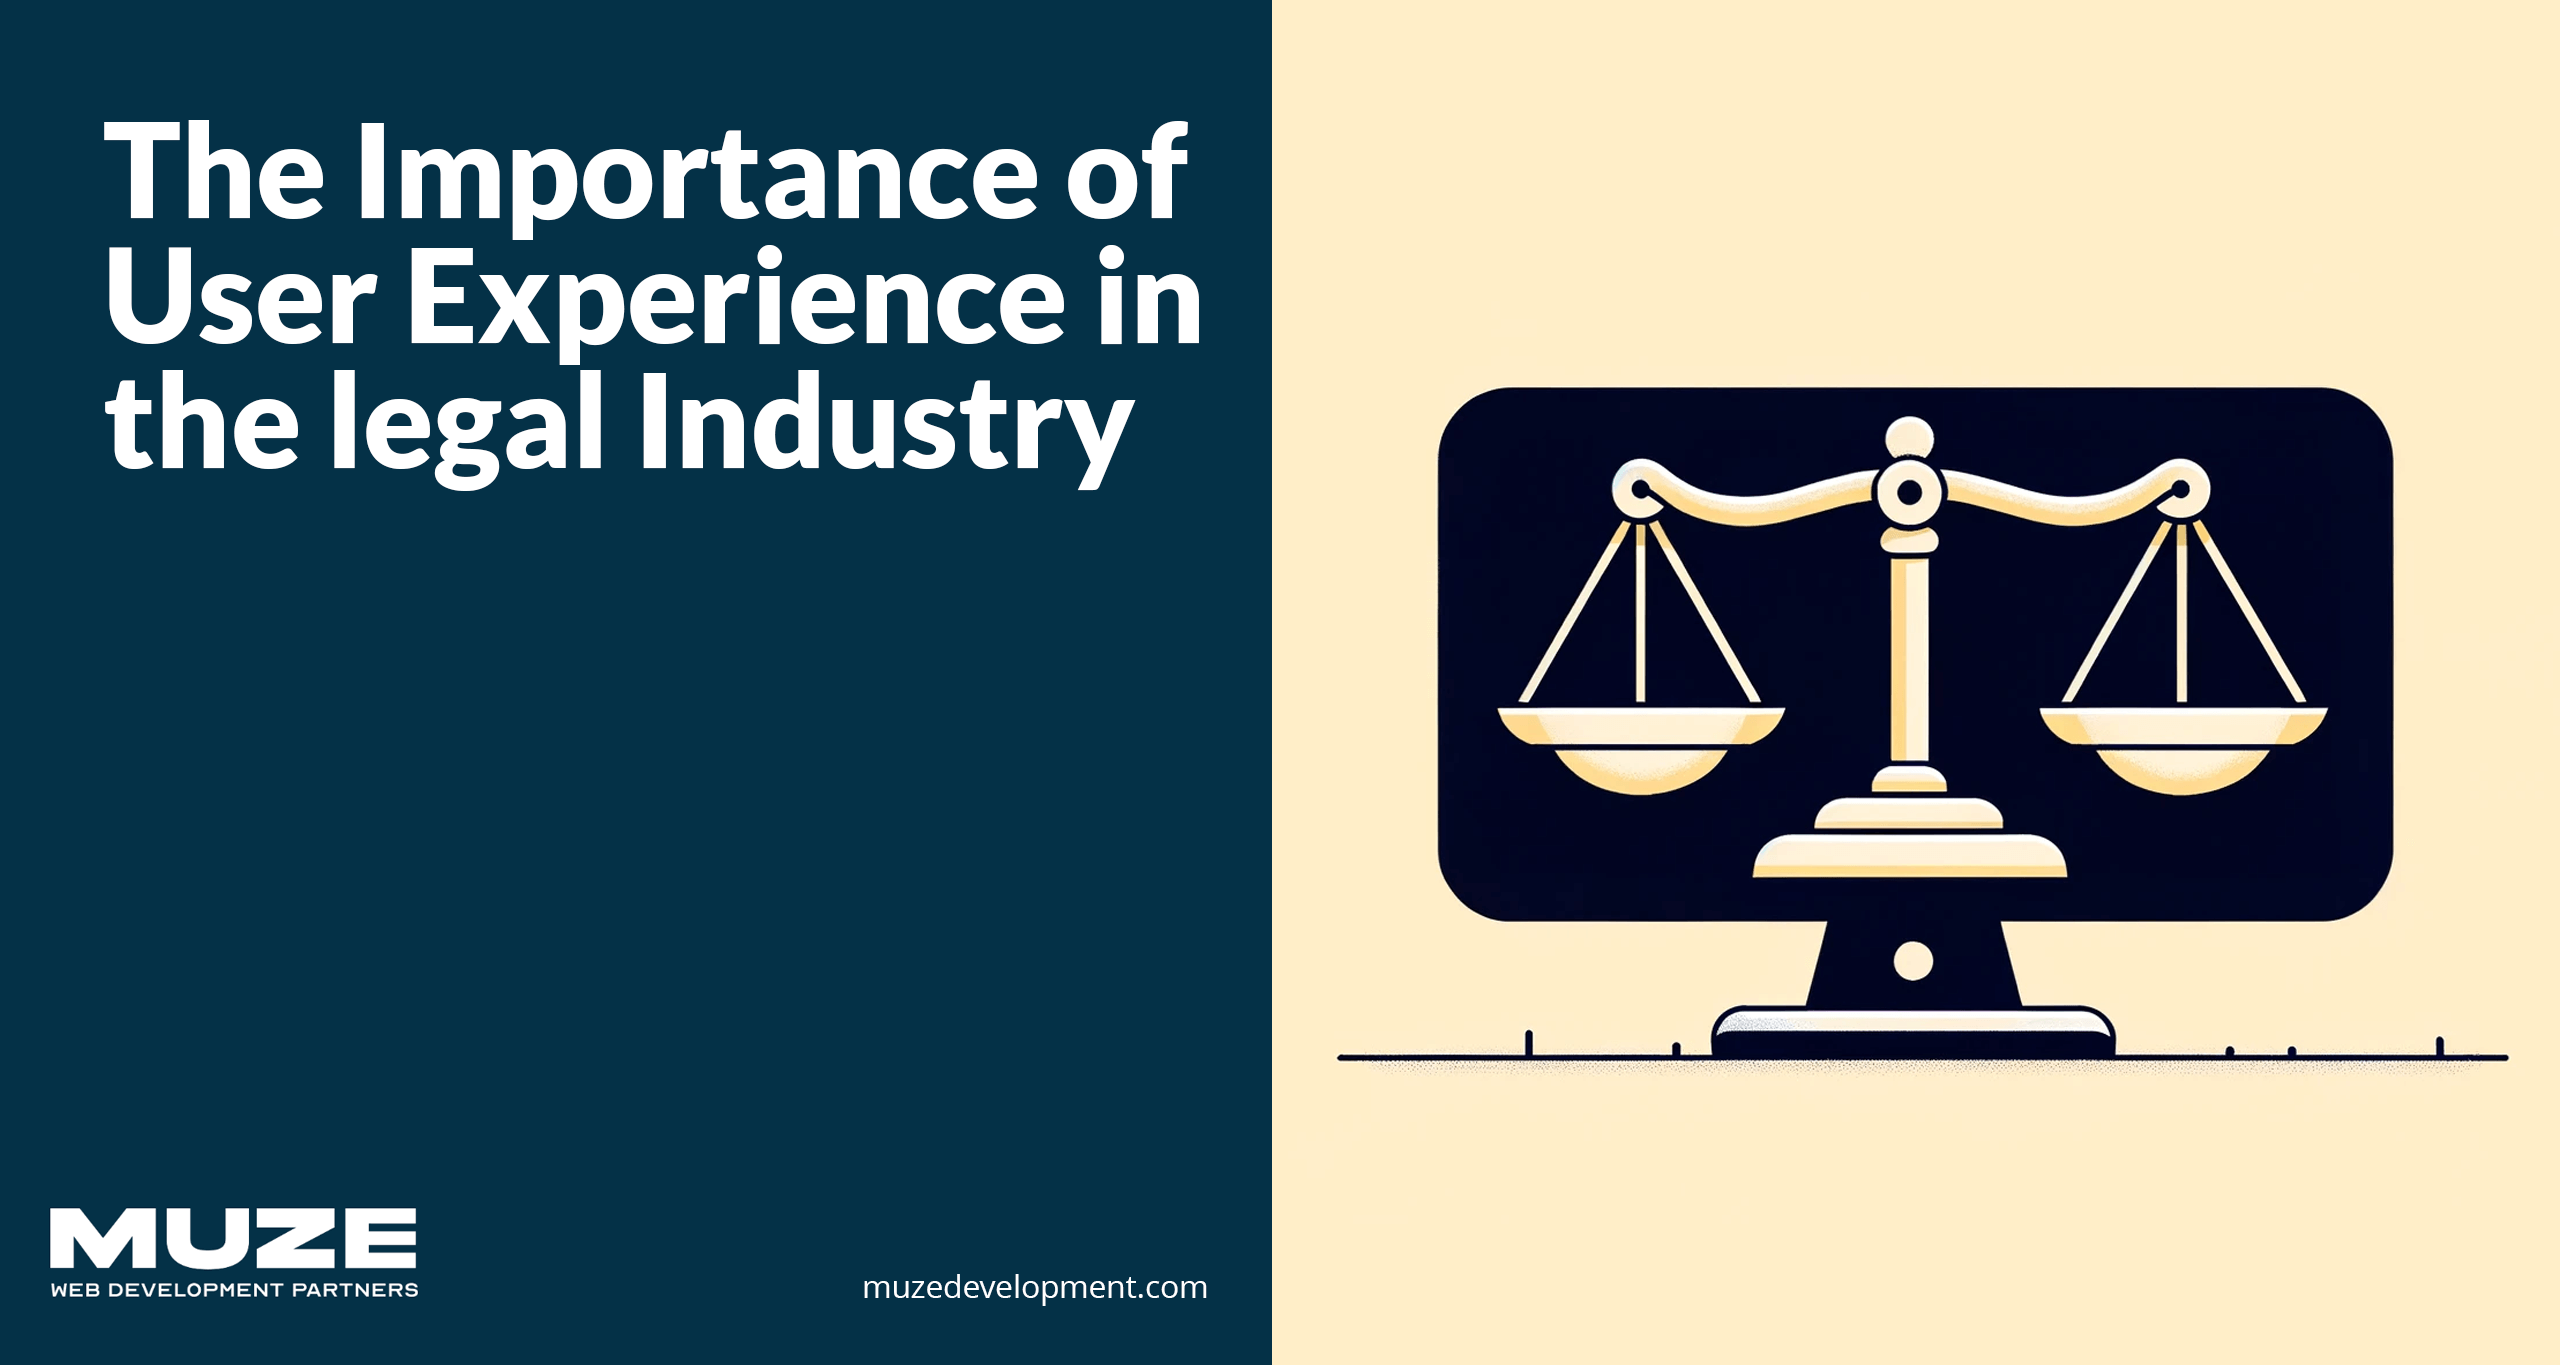 The Importance of User Experience in the Legal Industry